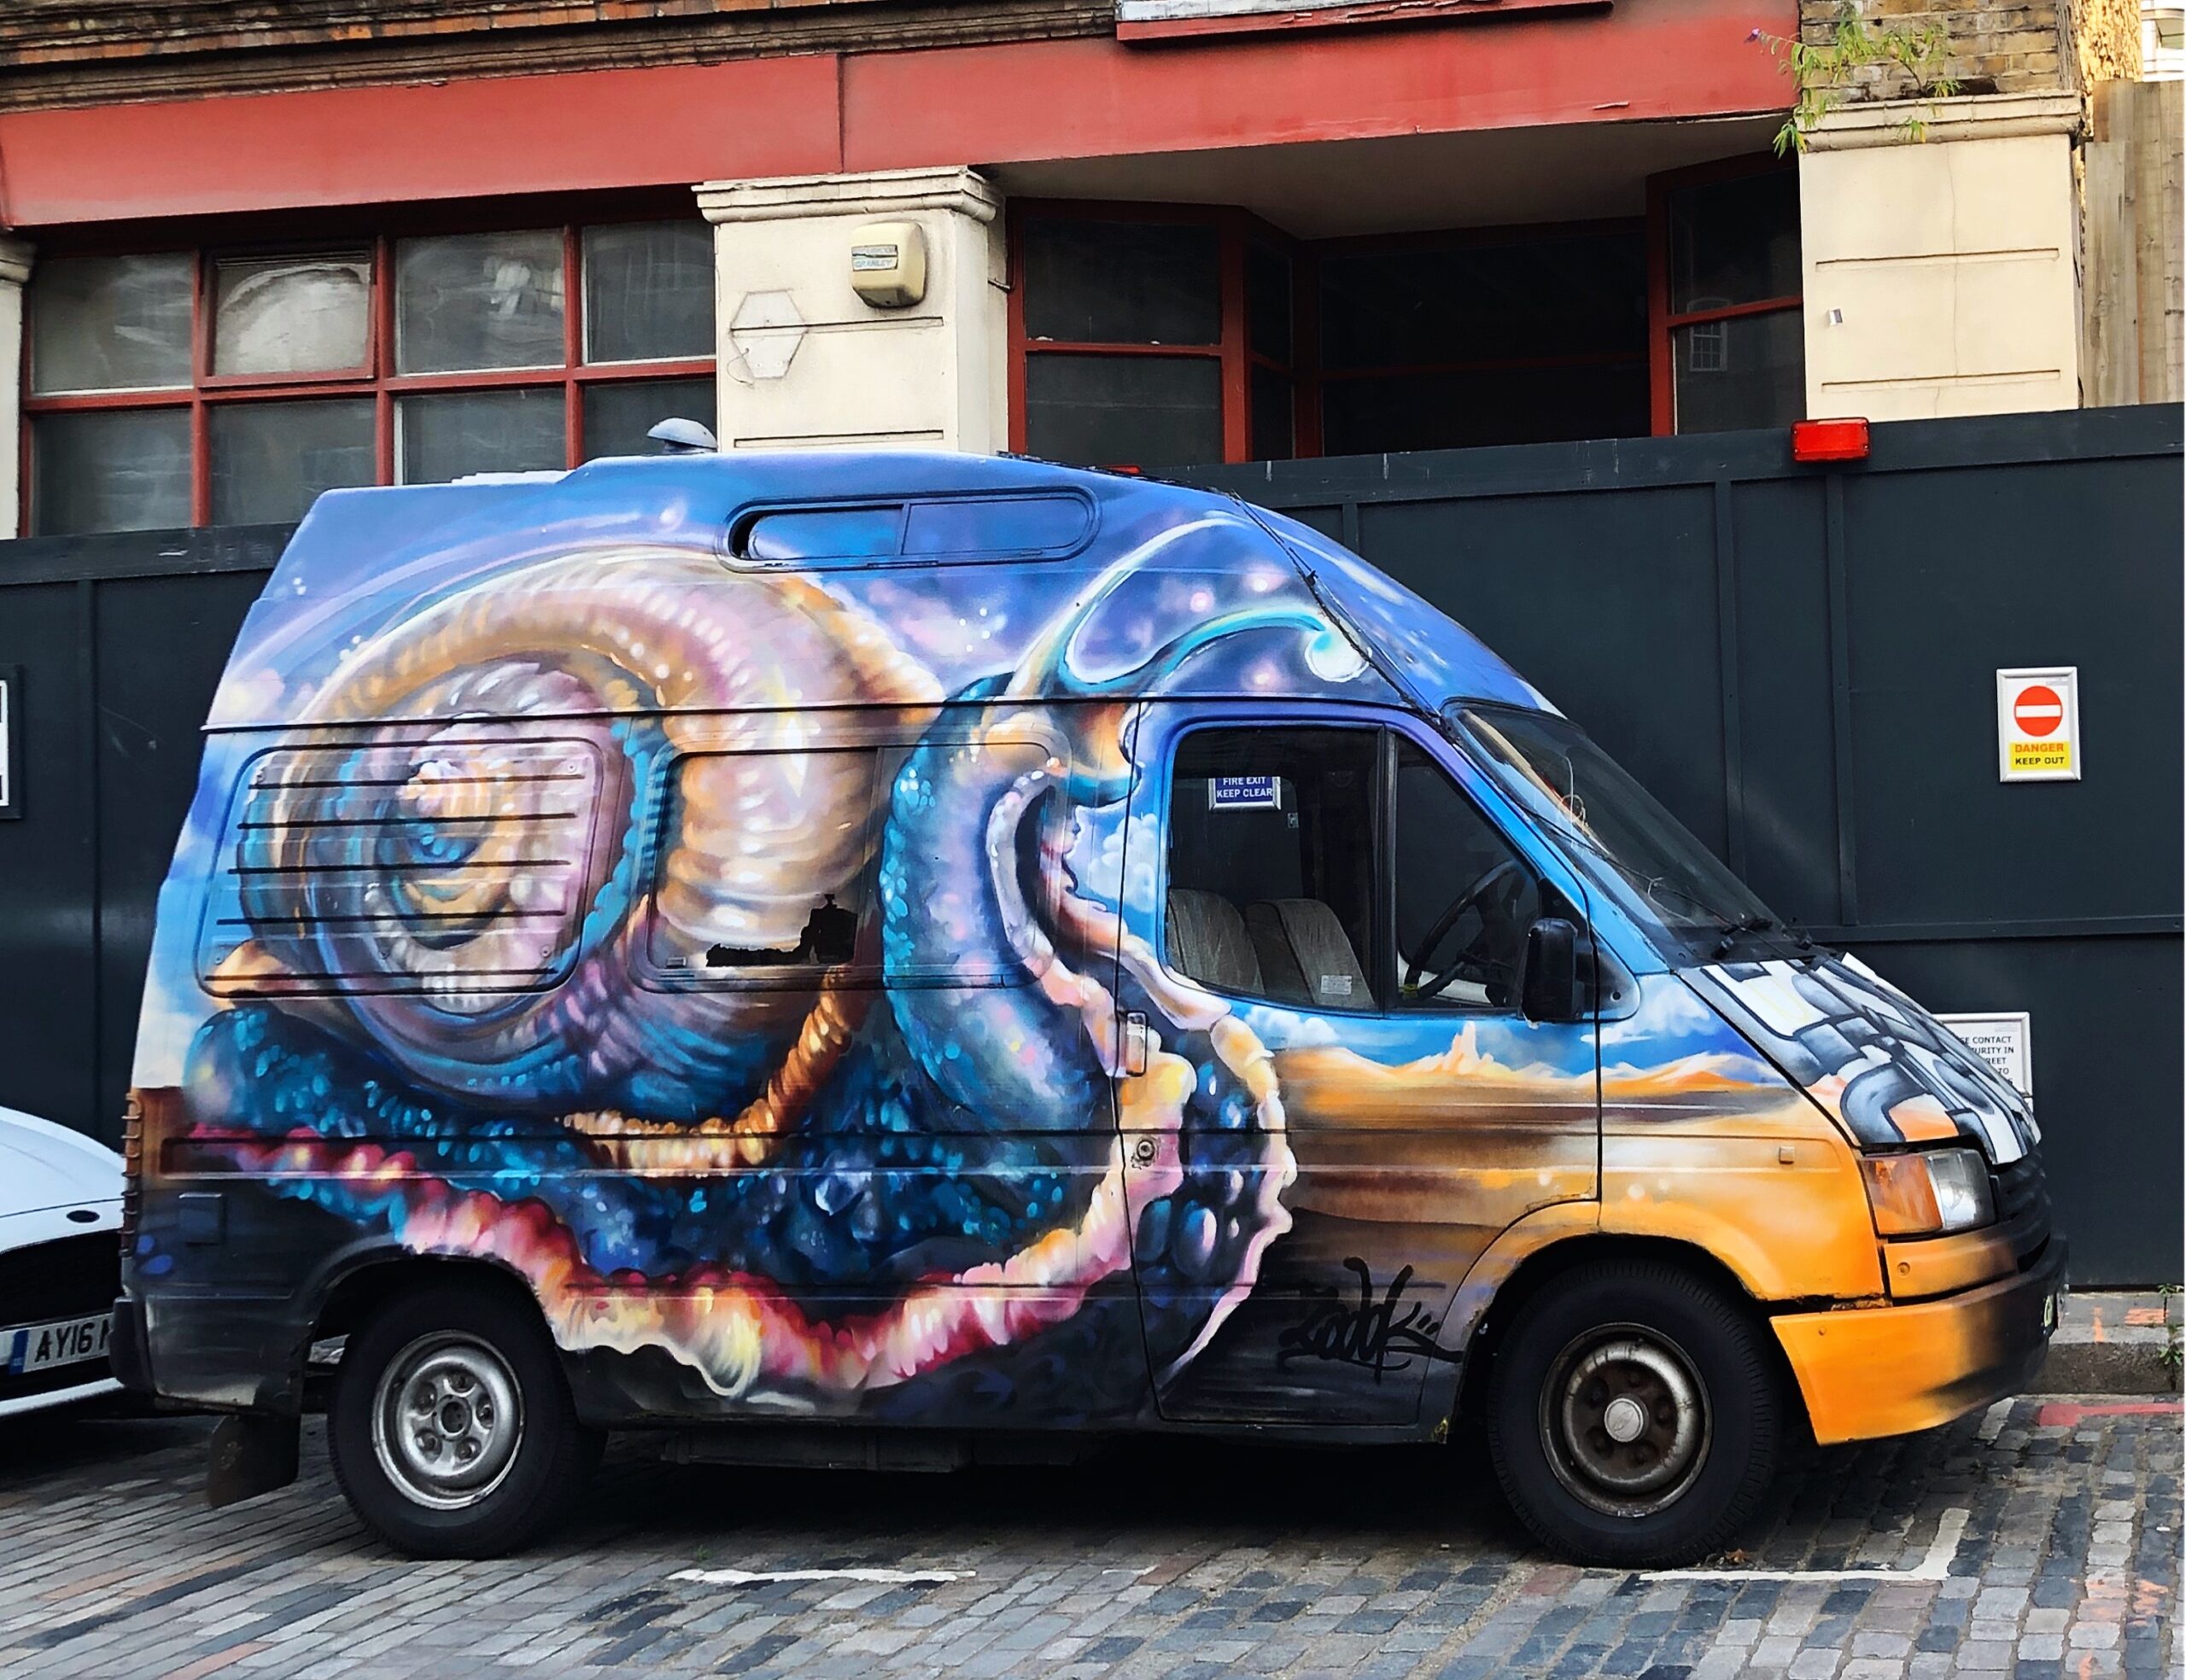 Van in London with Street Art Mural Painted Parked in Shoreditch